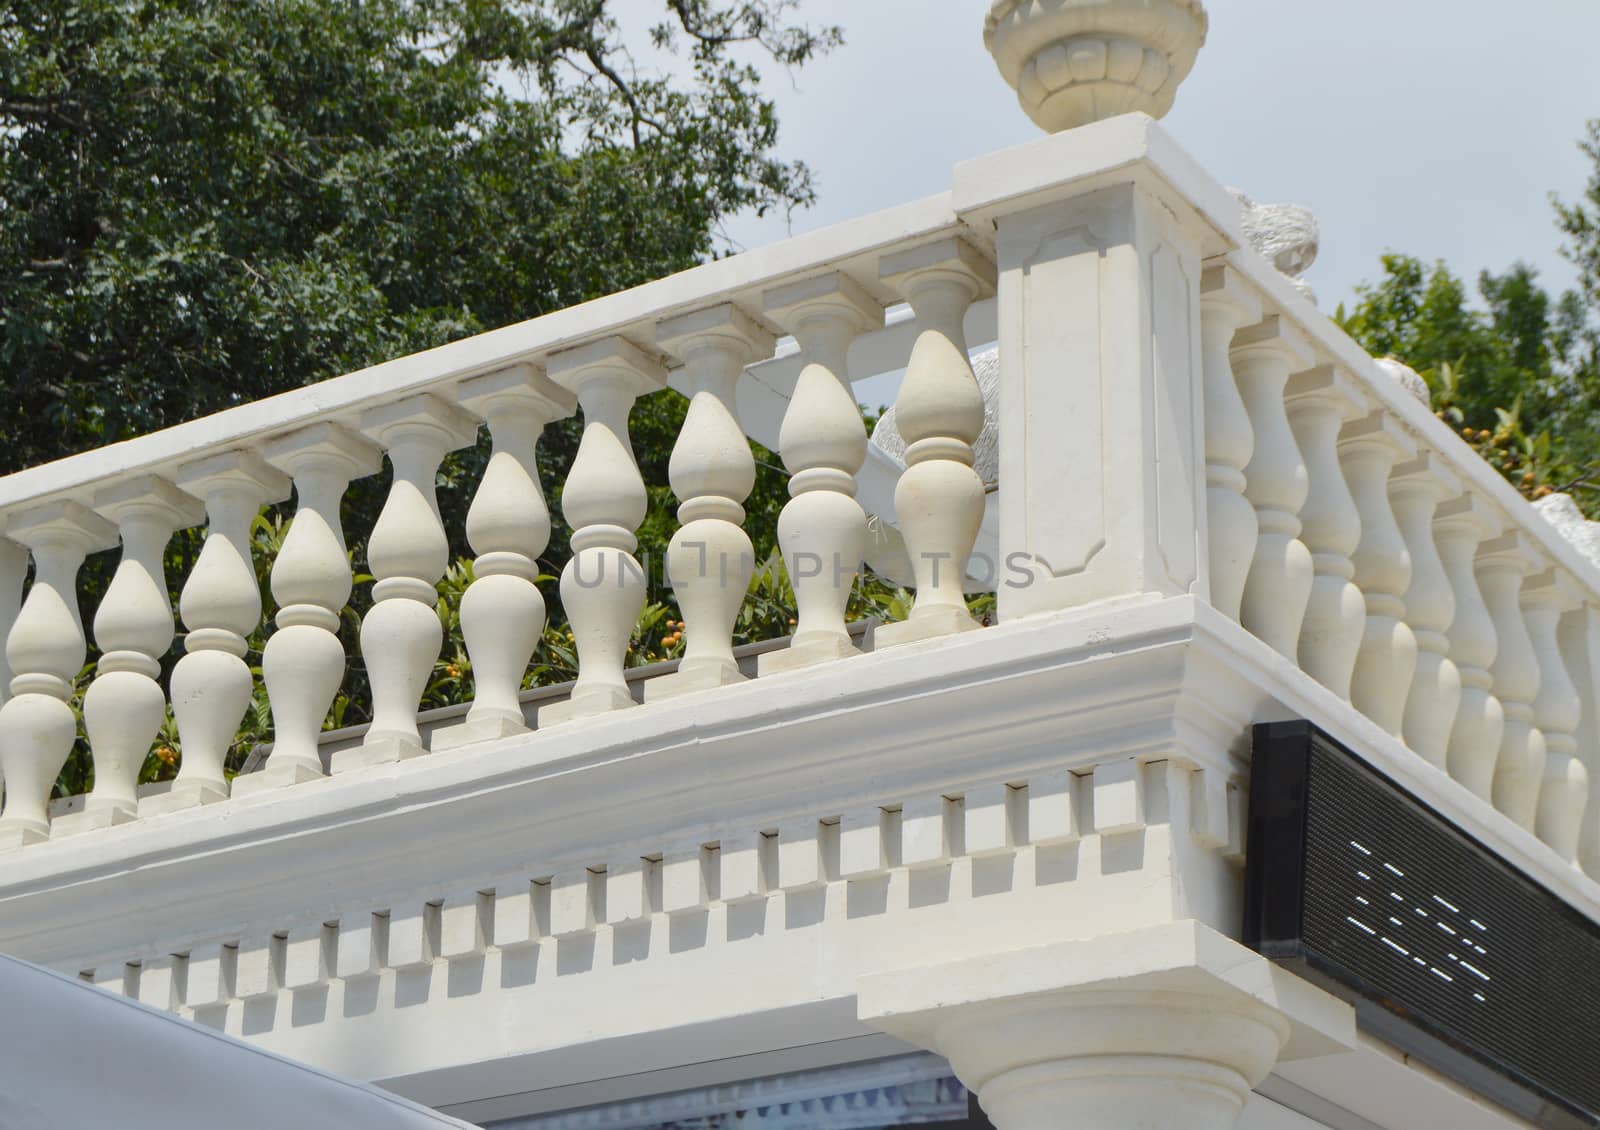 View of the romantic white balcony, terrace with balusters, white stone railing.